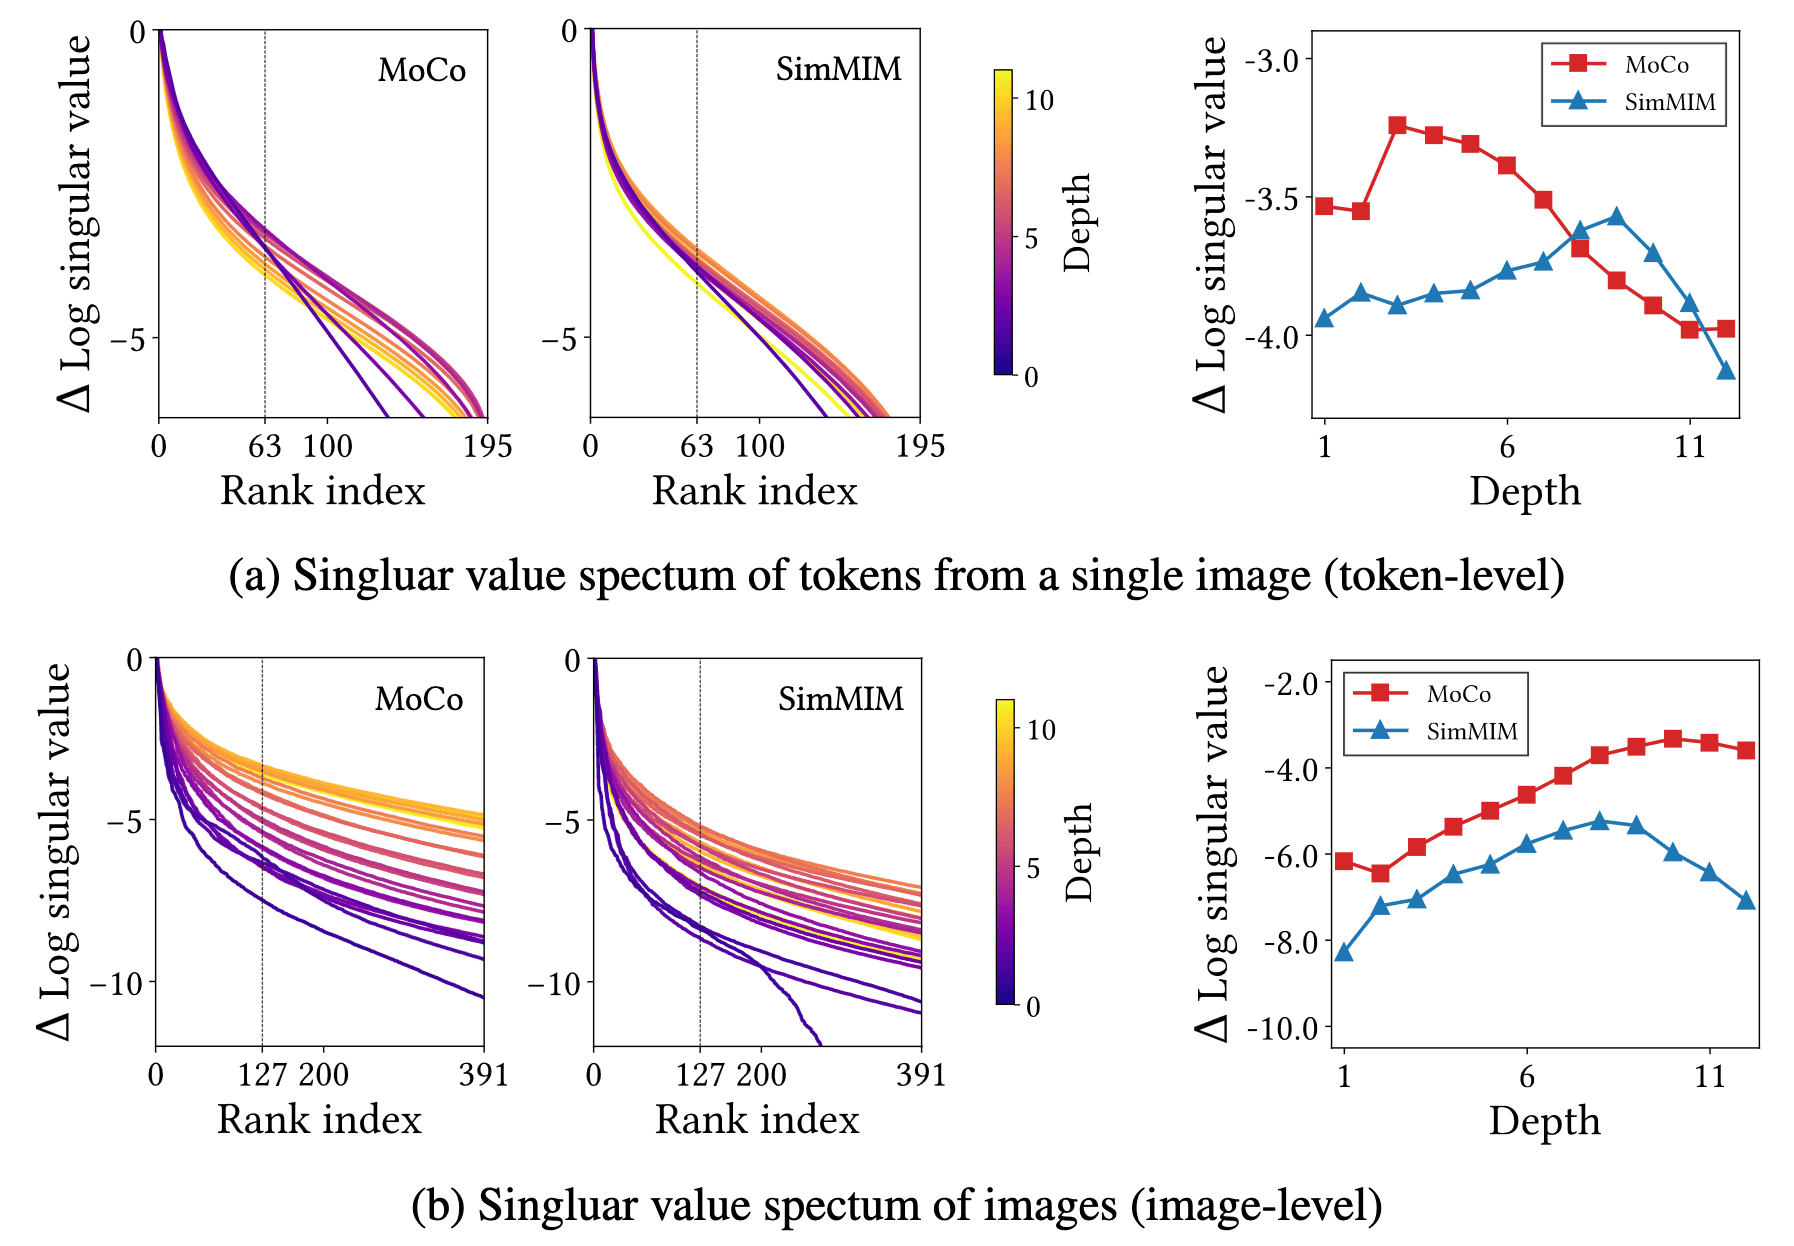 CL barely changes or even decreases the distribution volume of tokens from a single image